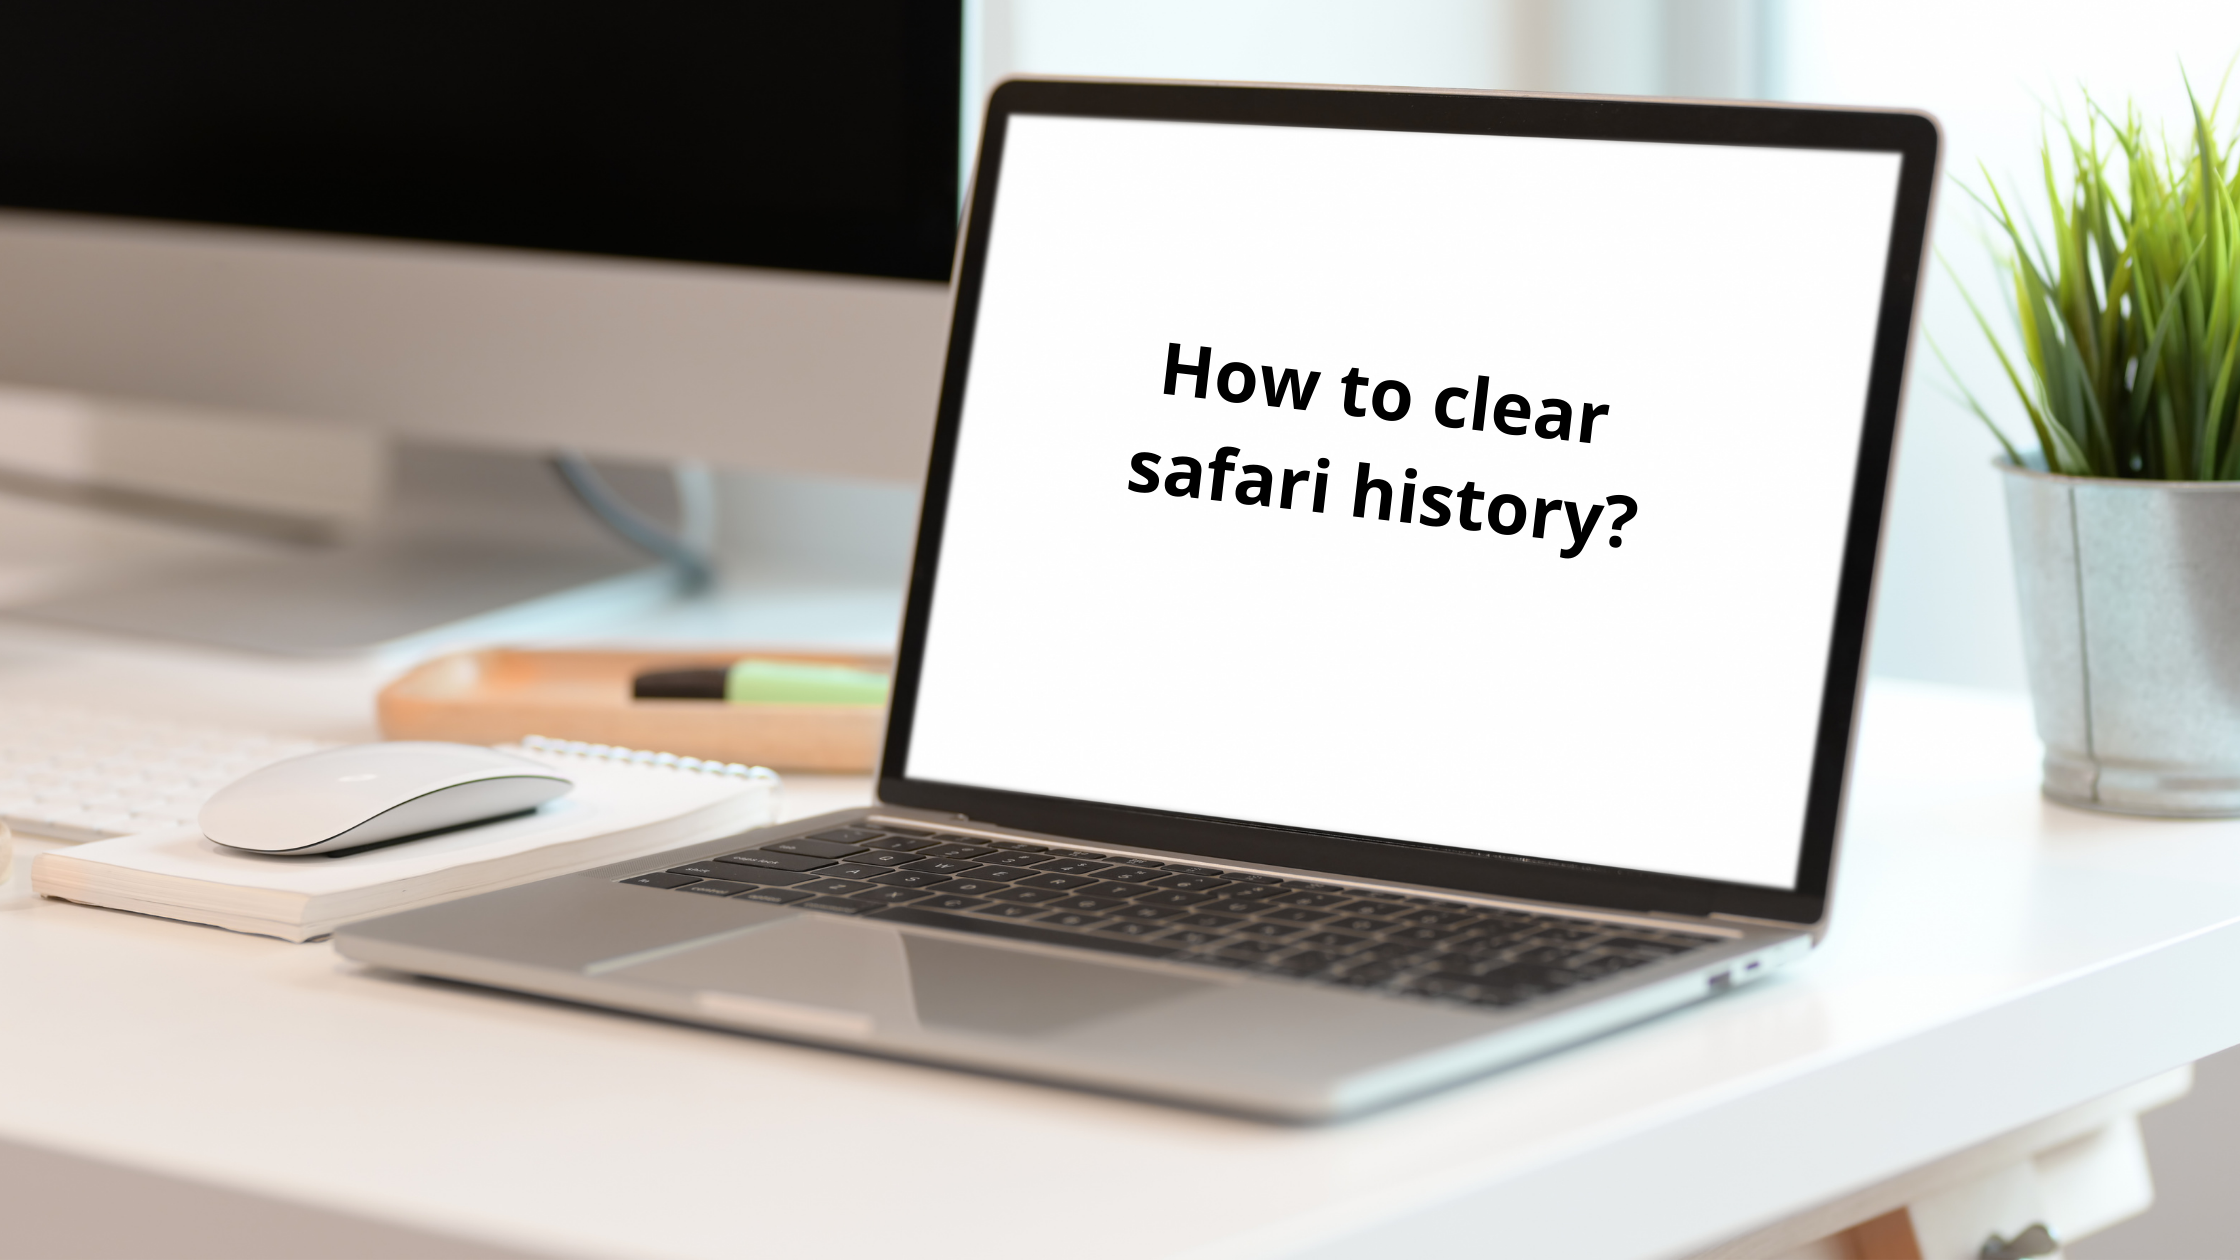 How to clear safari history?